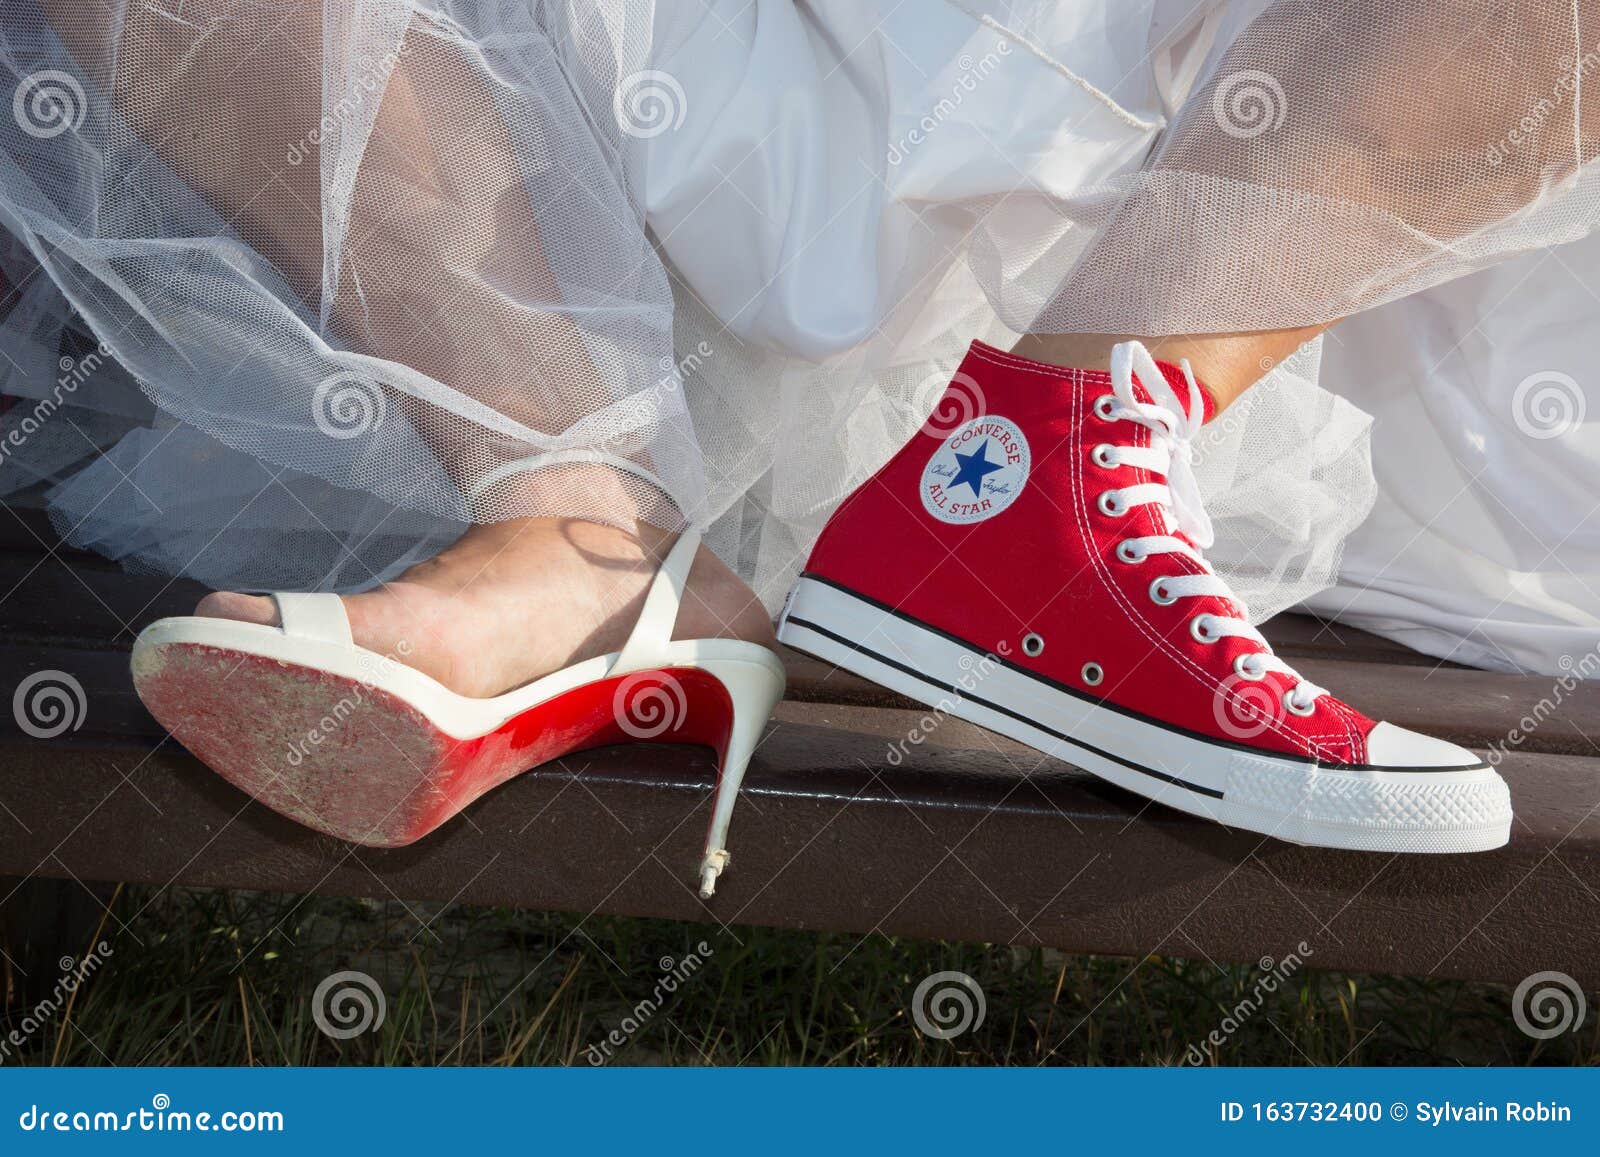 Bordeaux , Aquitaine / France - 11 07 2019 : High Heels Bride Feet Wedding  Dress and Red Sneakers Converse Editorial Image - Image of cute, clothing:  163732400